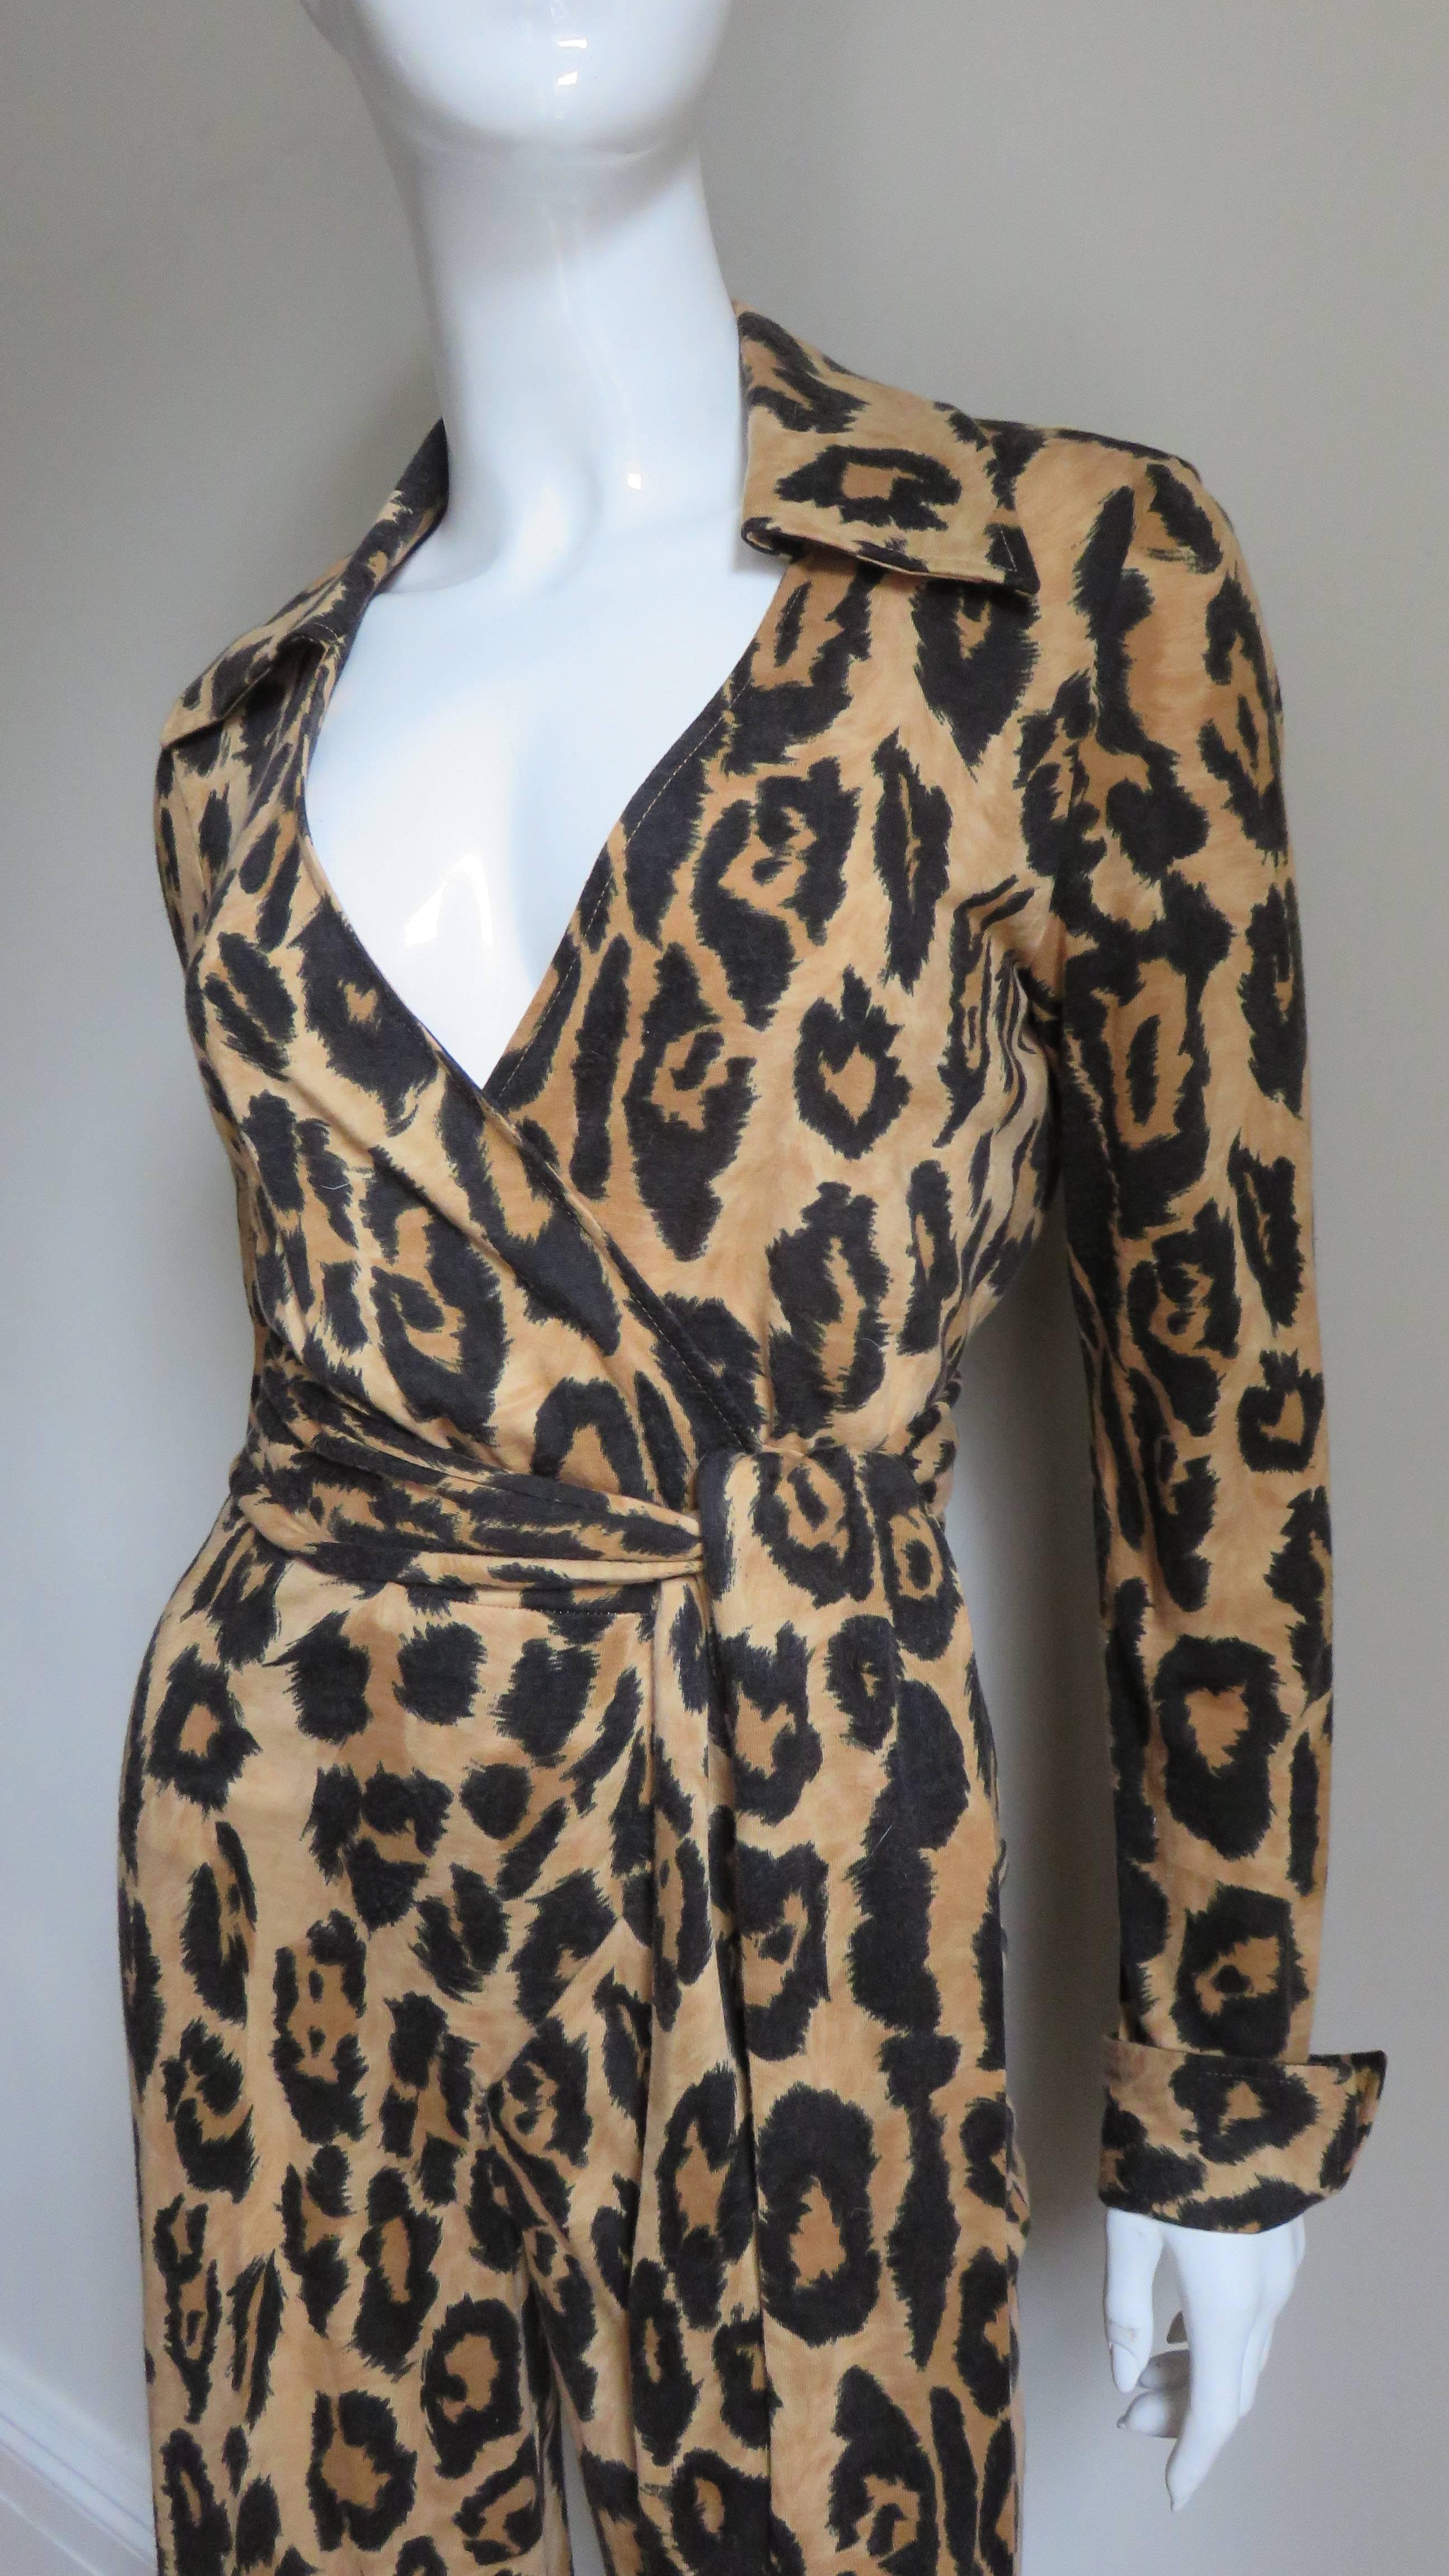 A fabulous iconic leopard print silk jersey jumpsuit by Diane Von Furstenberg.  It has a shirt collar, long sleeves with fold back cuffs and it wraps tying at the waist. The legs are straight. The jumpsuit is unlined.
Fits size Small, Medium. Marked